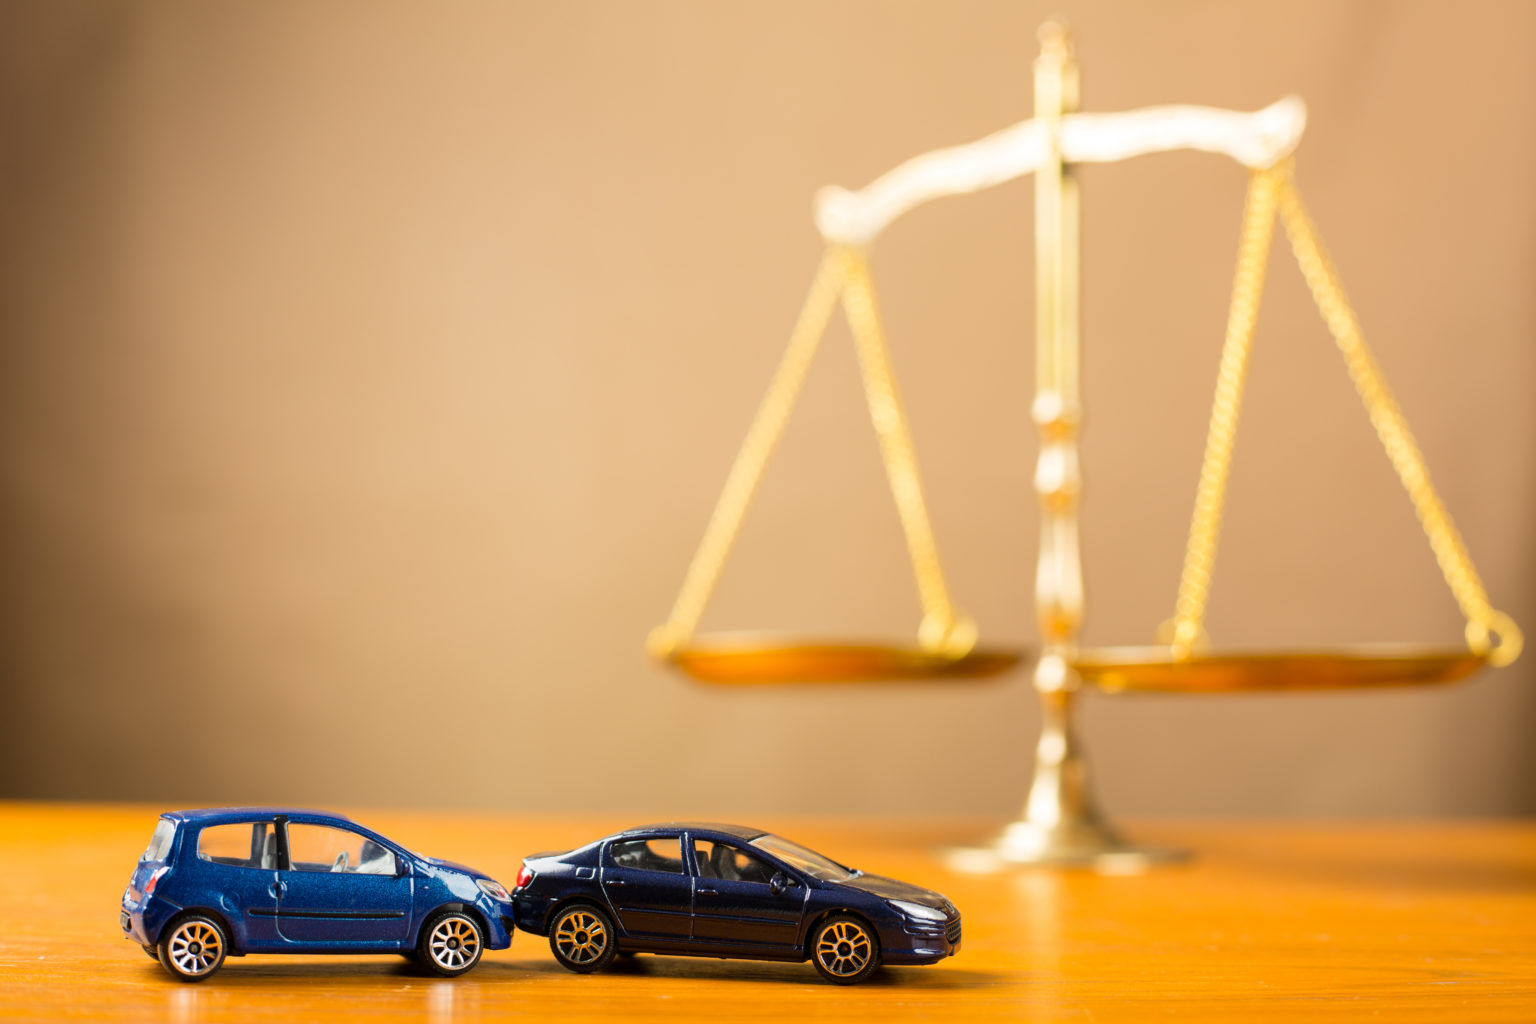 Lake Charles Car Accident Lawyer